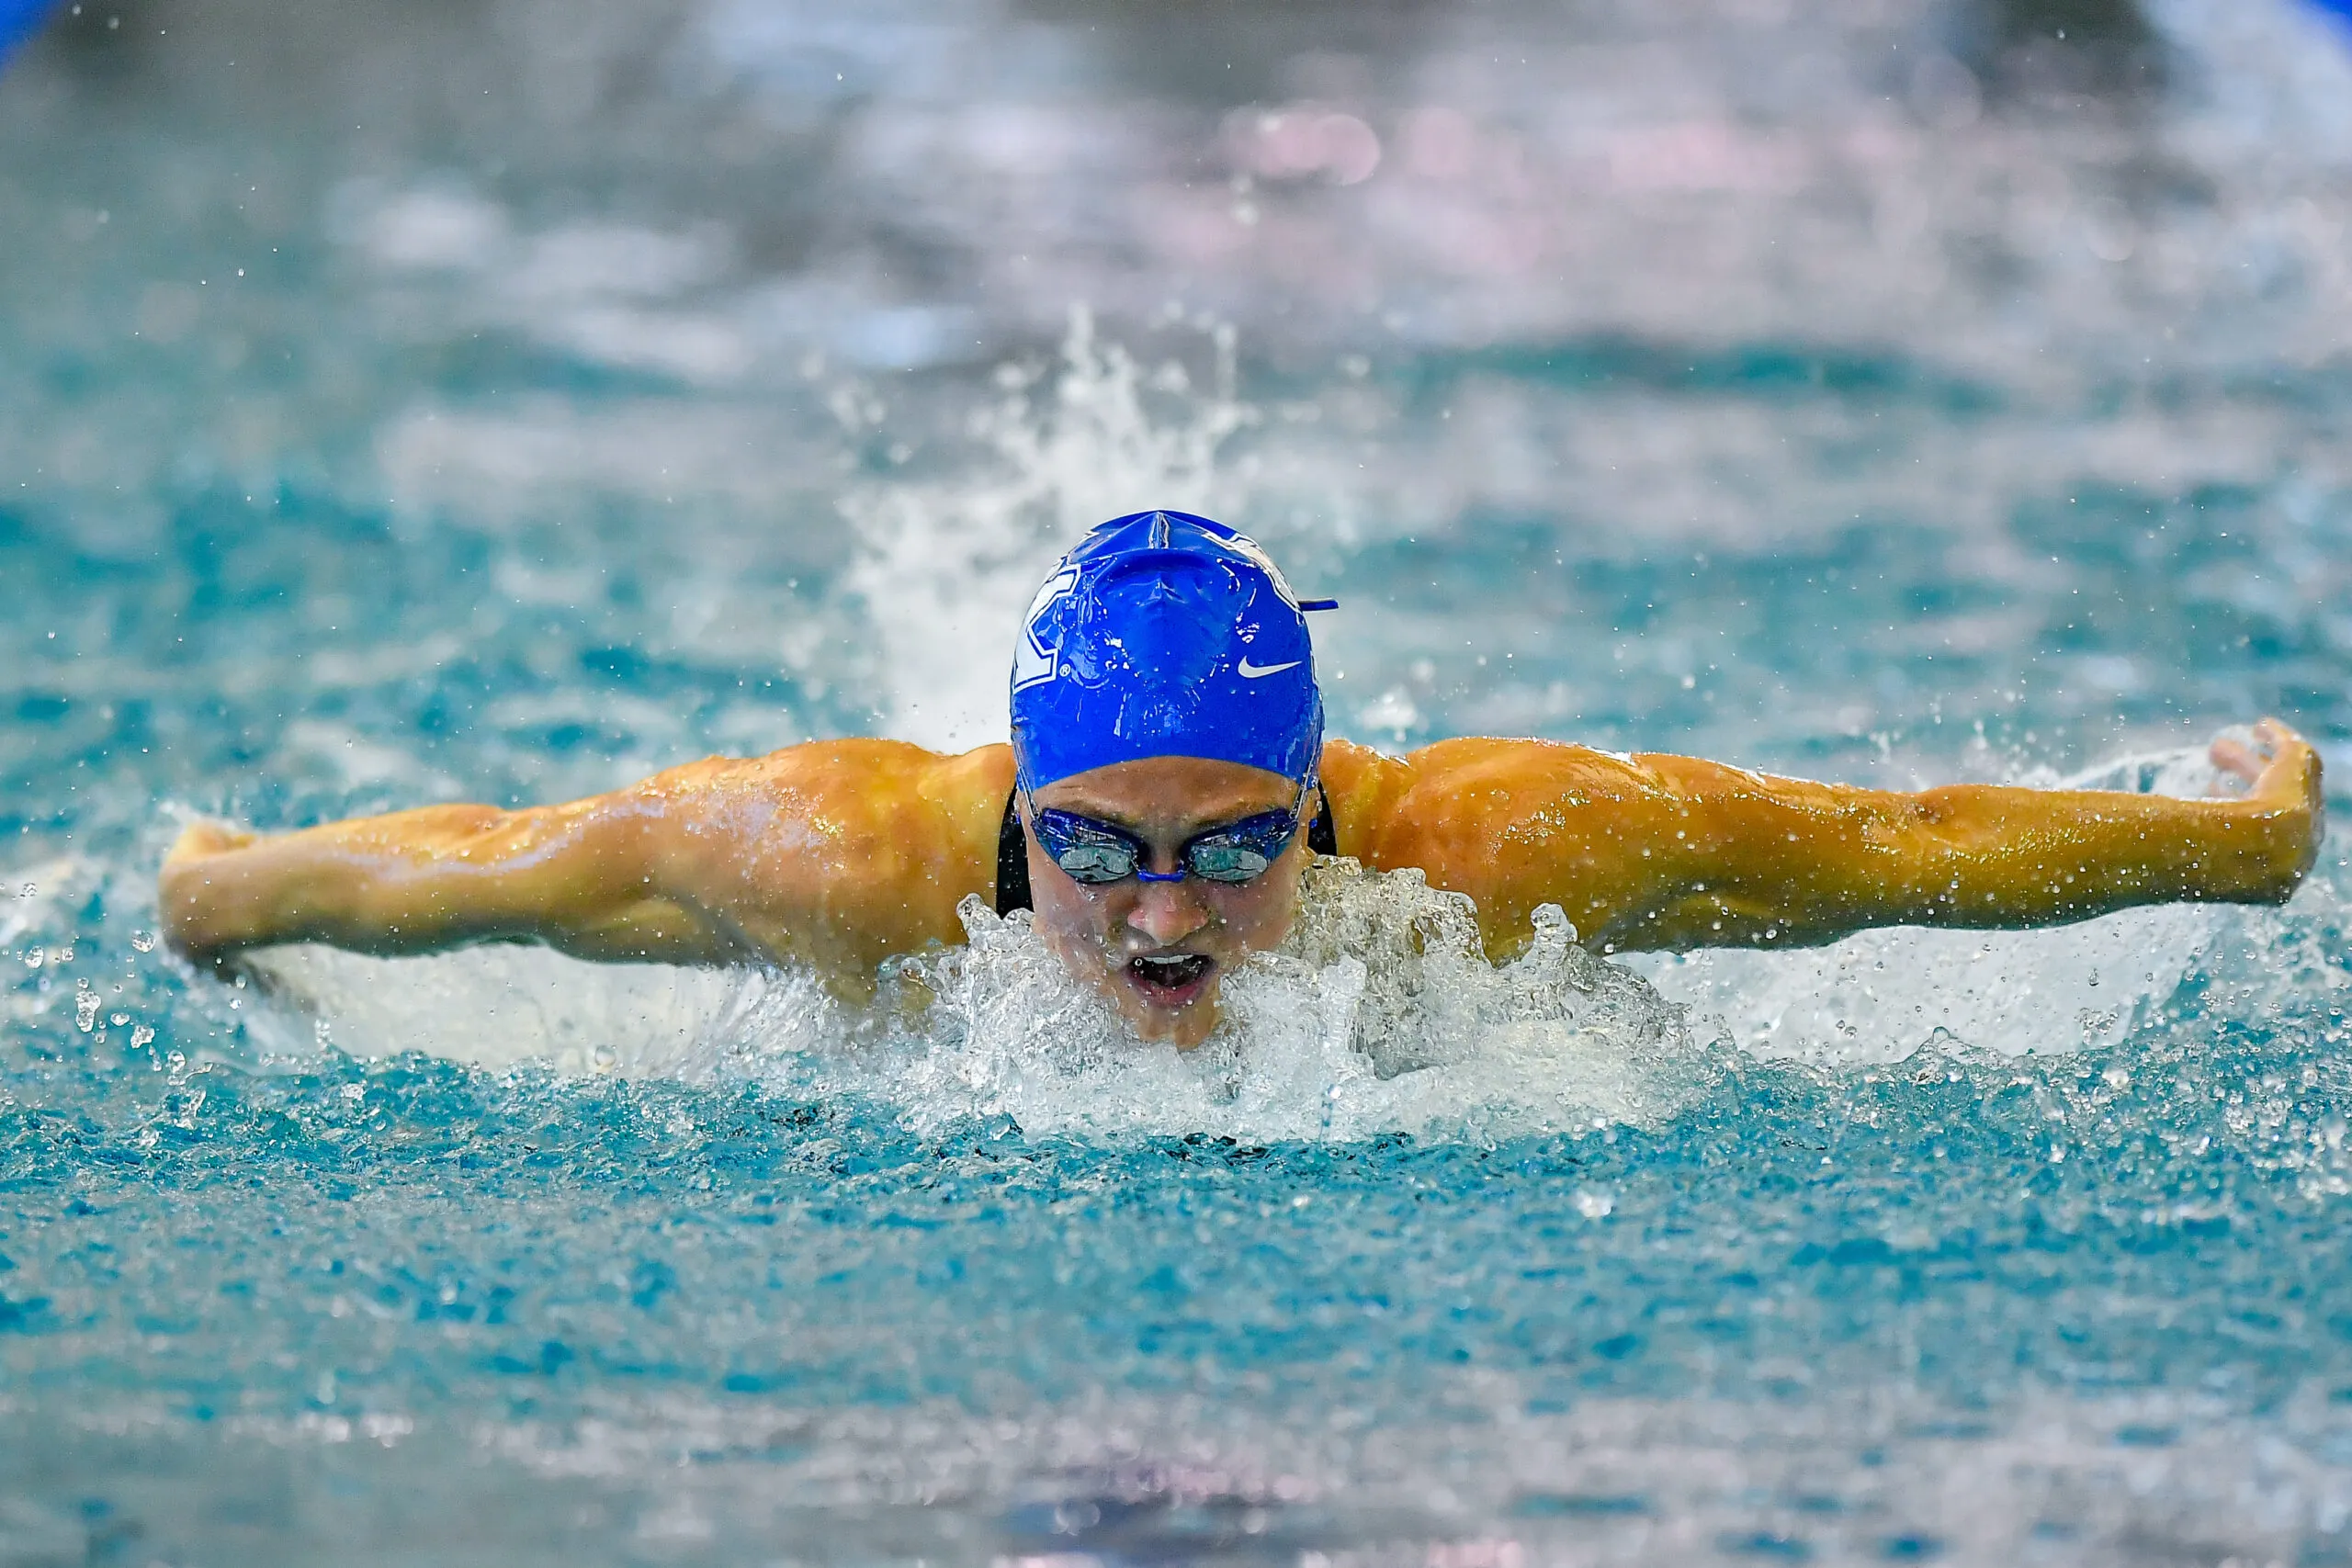 ATLANTA, GA - MARCH 19:  Kentucky swimmer Riley Gaines swims the 200 Butterfly prelims at the NCAA Swimming and Diving Championships on March 19th, 2022 at the McAuley Aquatic Center in Atlanta, Georgia.  (Photo by Rich von Biberstein/Icon Sportswire via Getty Images)